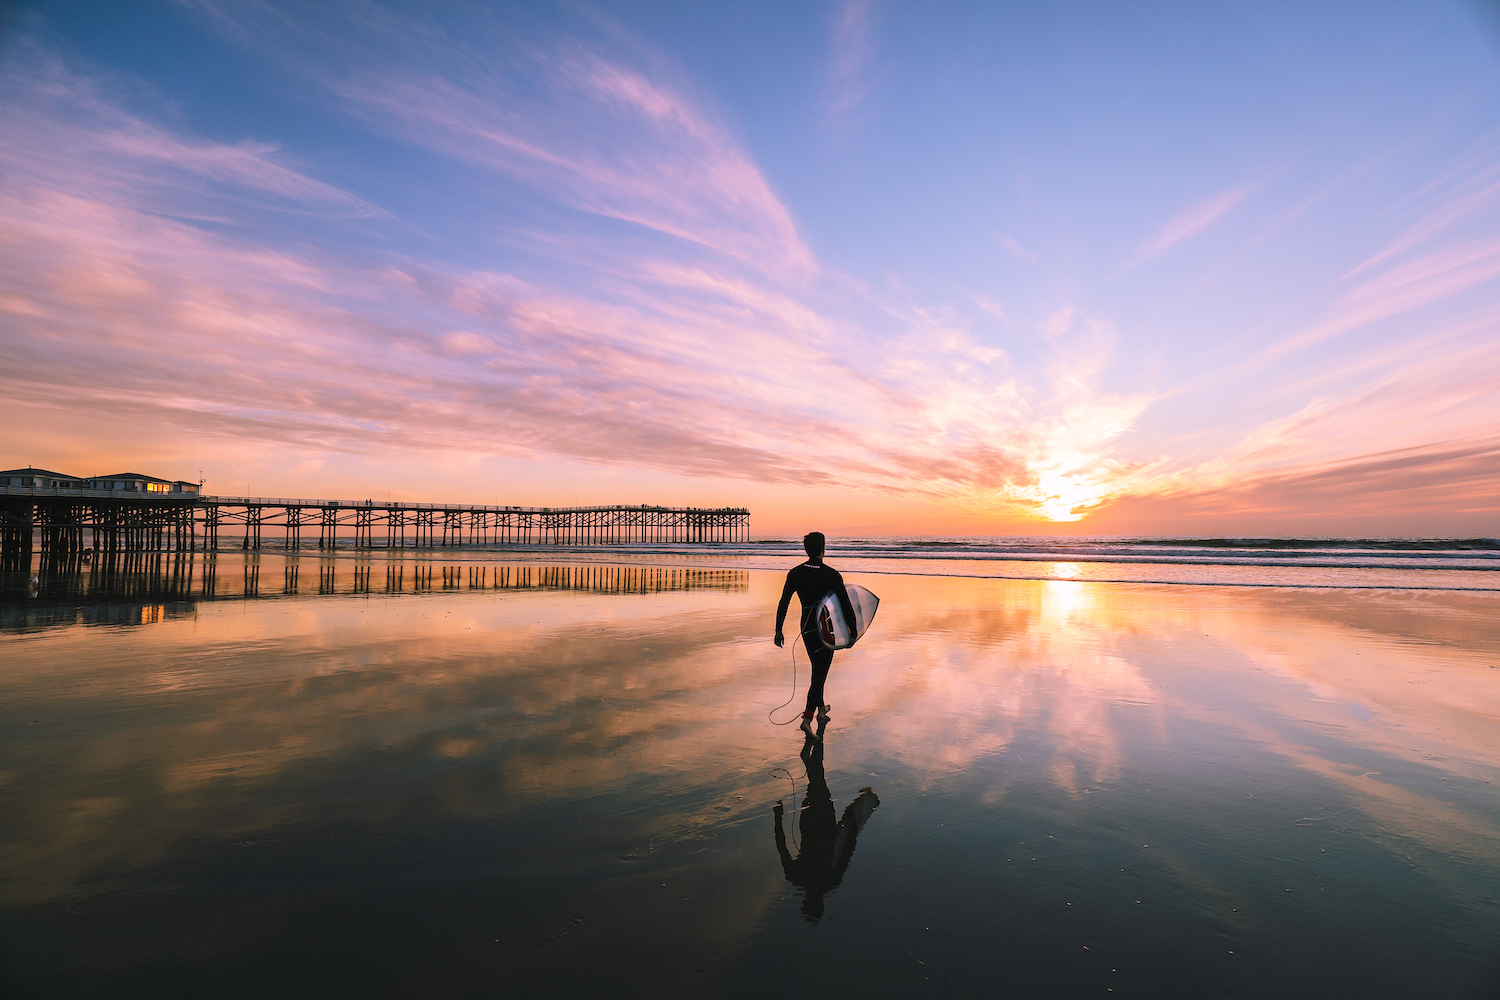 The best surf spots in San Diego featuring Pacific Beach's Crystal Pier with a surfer walking on the beach at sunset